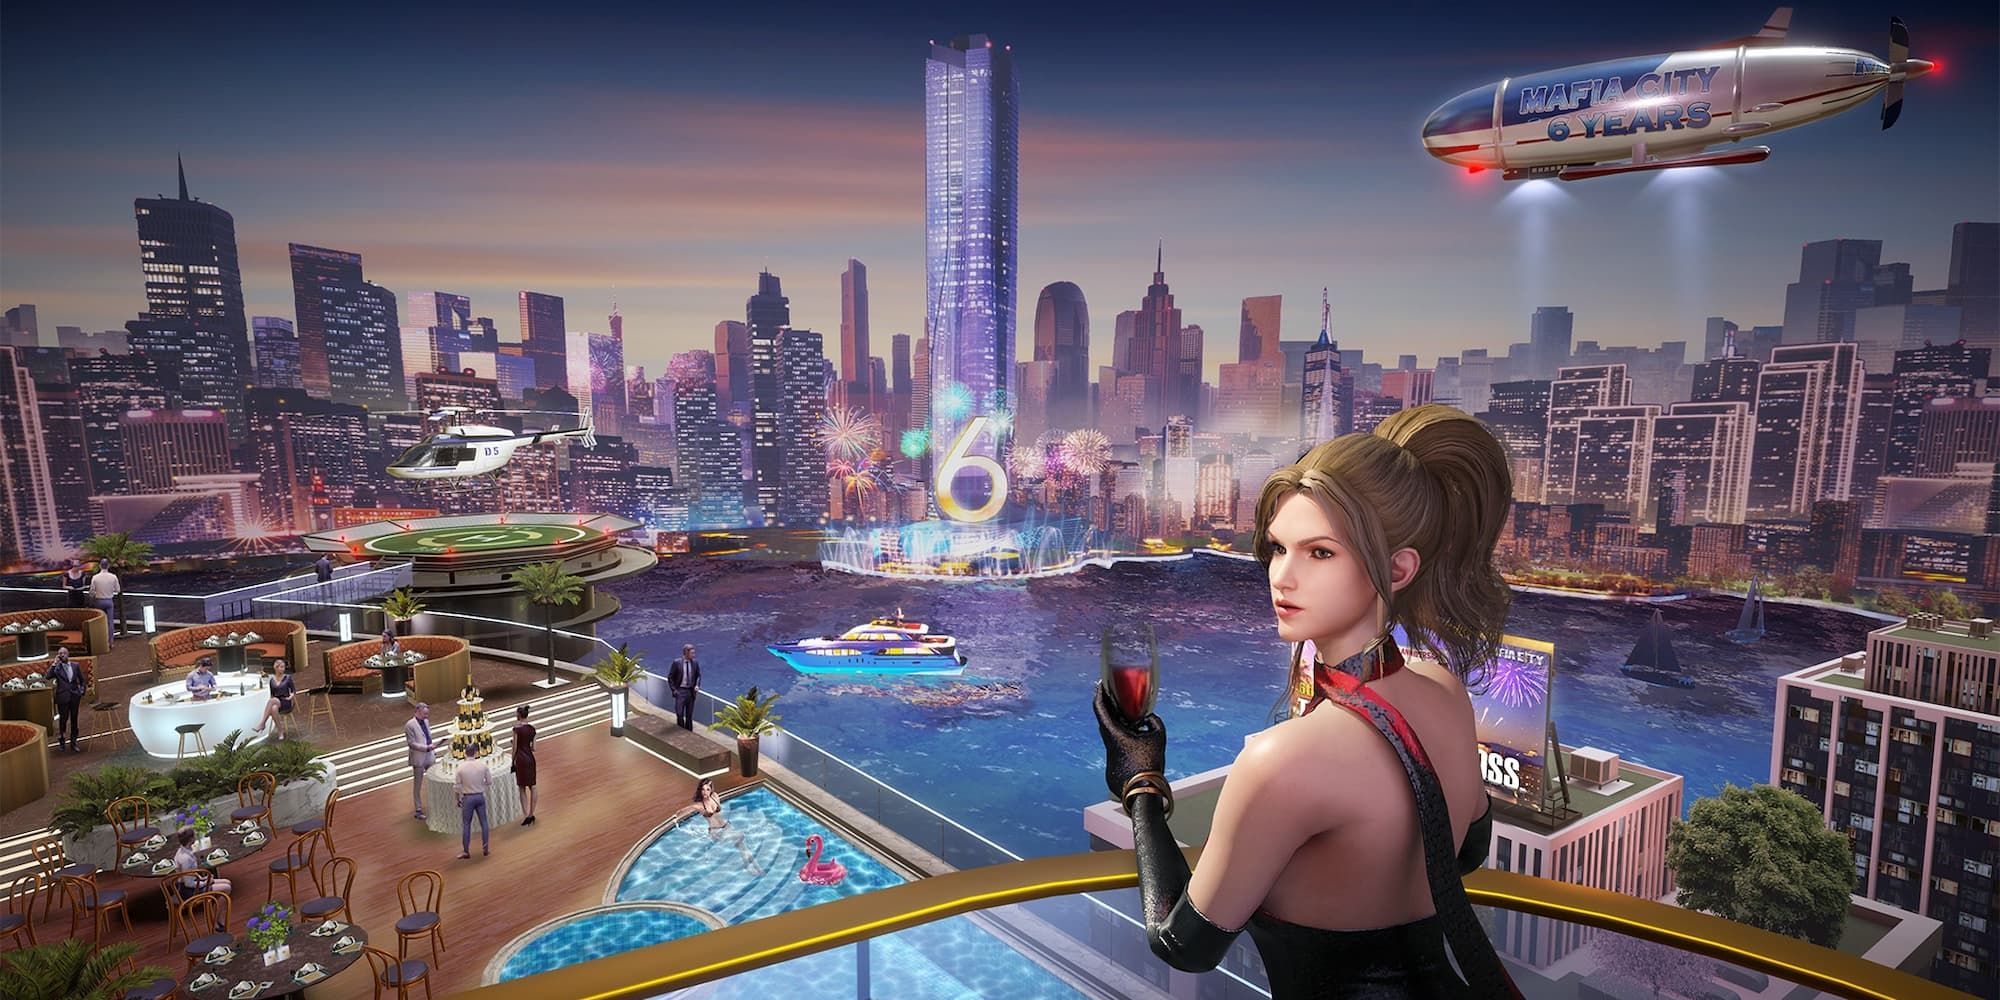 A woman looks over a balcony with a drink in hand, as a blimp and a giant number indicate Mafia City's 6th anniversary.